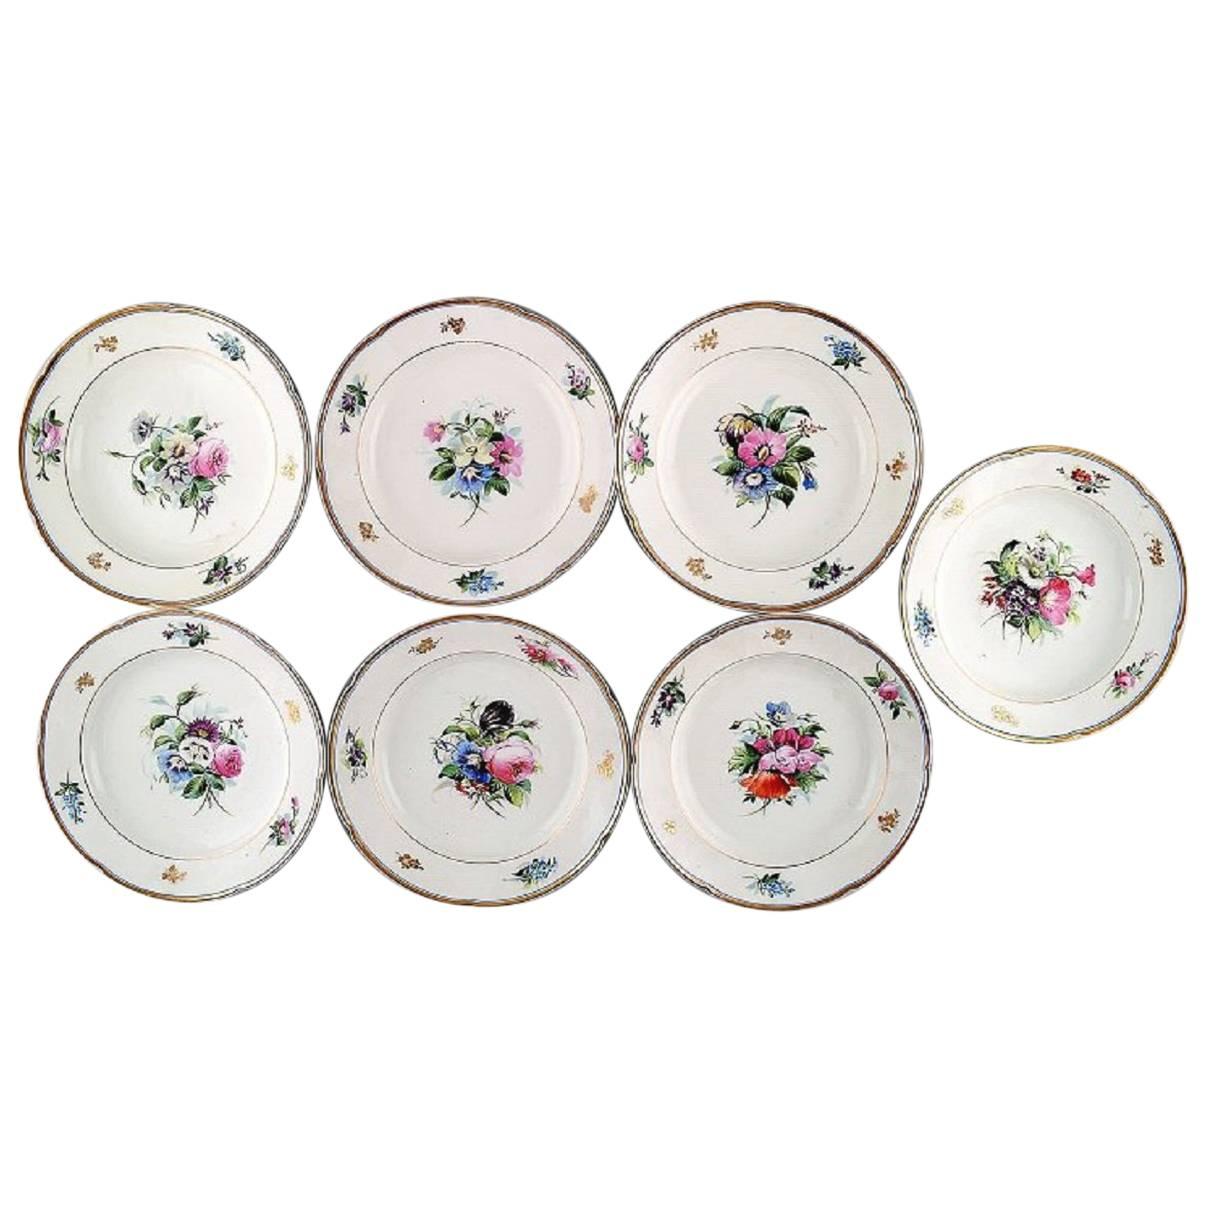 7 antique b&g bing & grøndahl deep plates. Hand painted with flowers For Sale